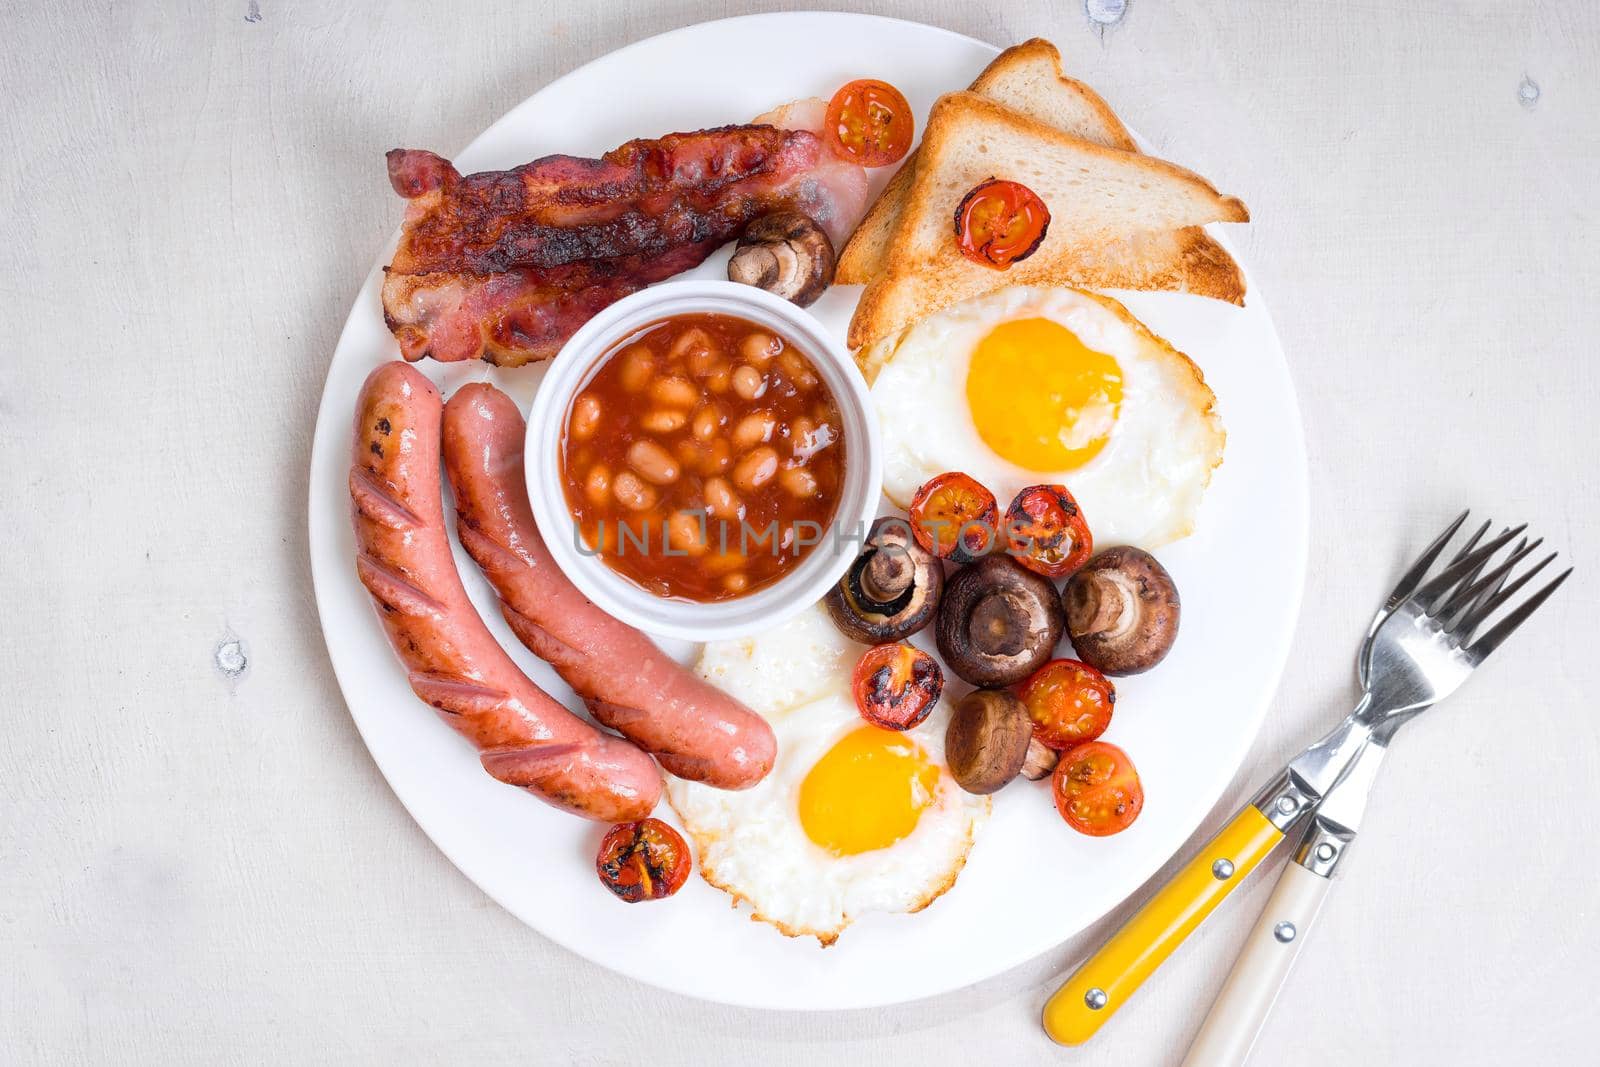 Full english breakfast with fried eggs, tomatoes, sausages, bacon, mushrooms, toasts and beans. Breakfast on a white plate with forks on the white wooden table. Top view